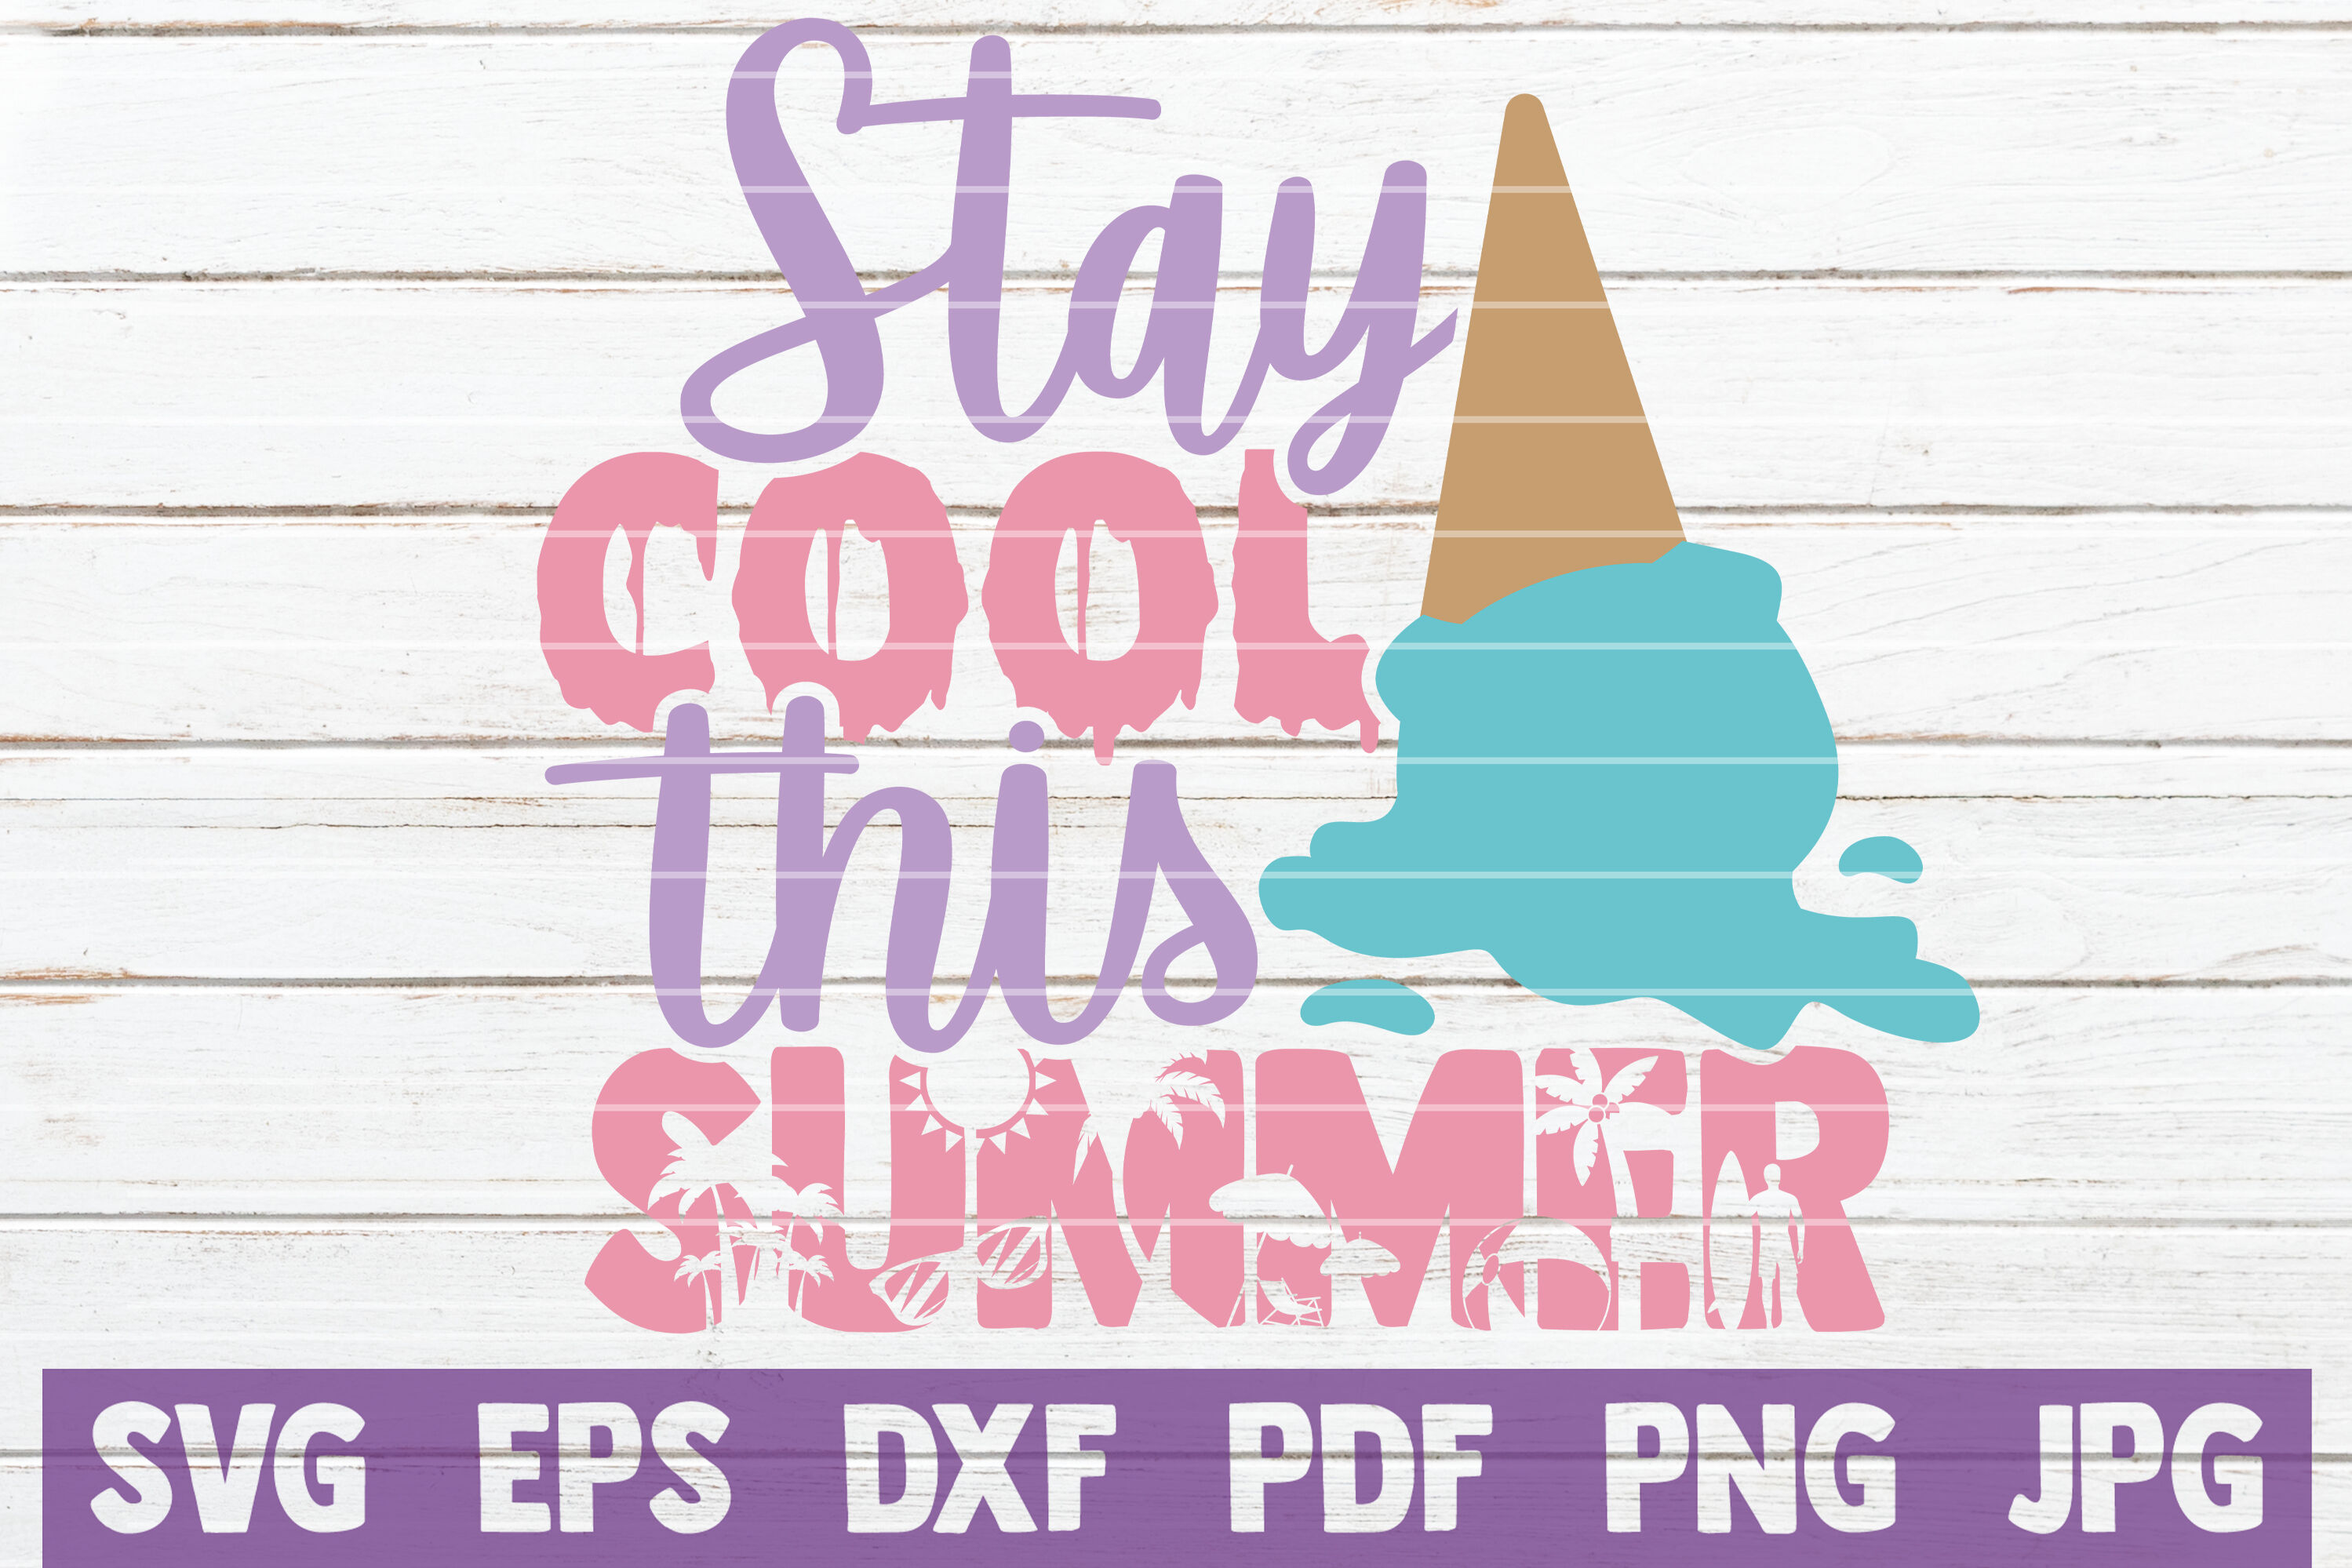 Download Stay Cool This Summer Svg Cut File By Mintymarshmallows Thehungryjpeg Com